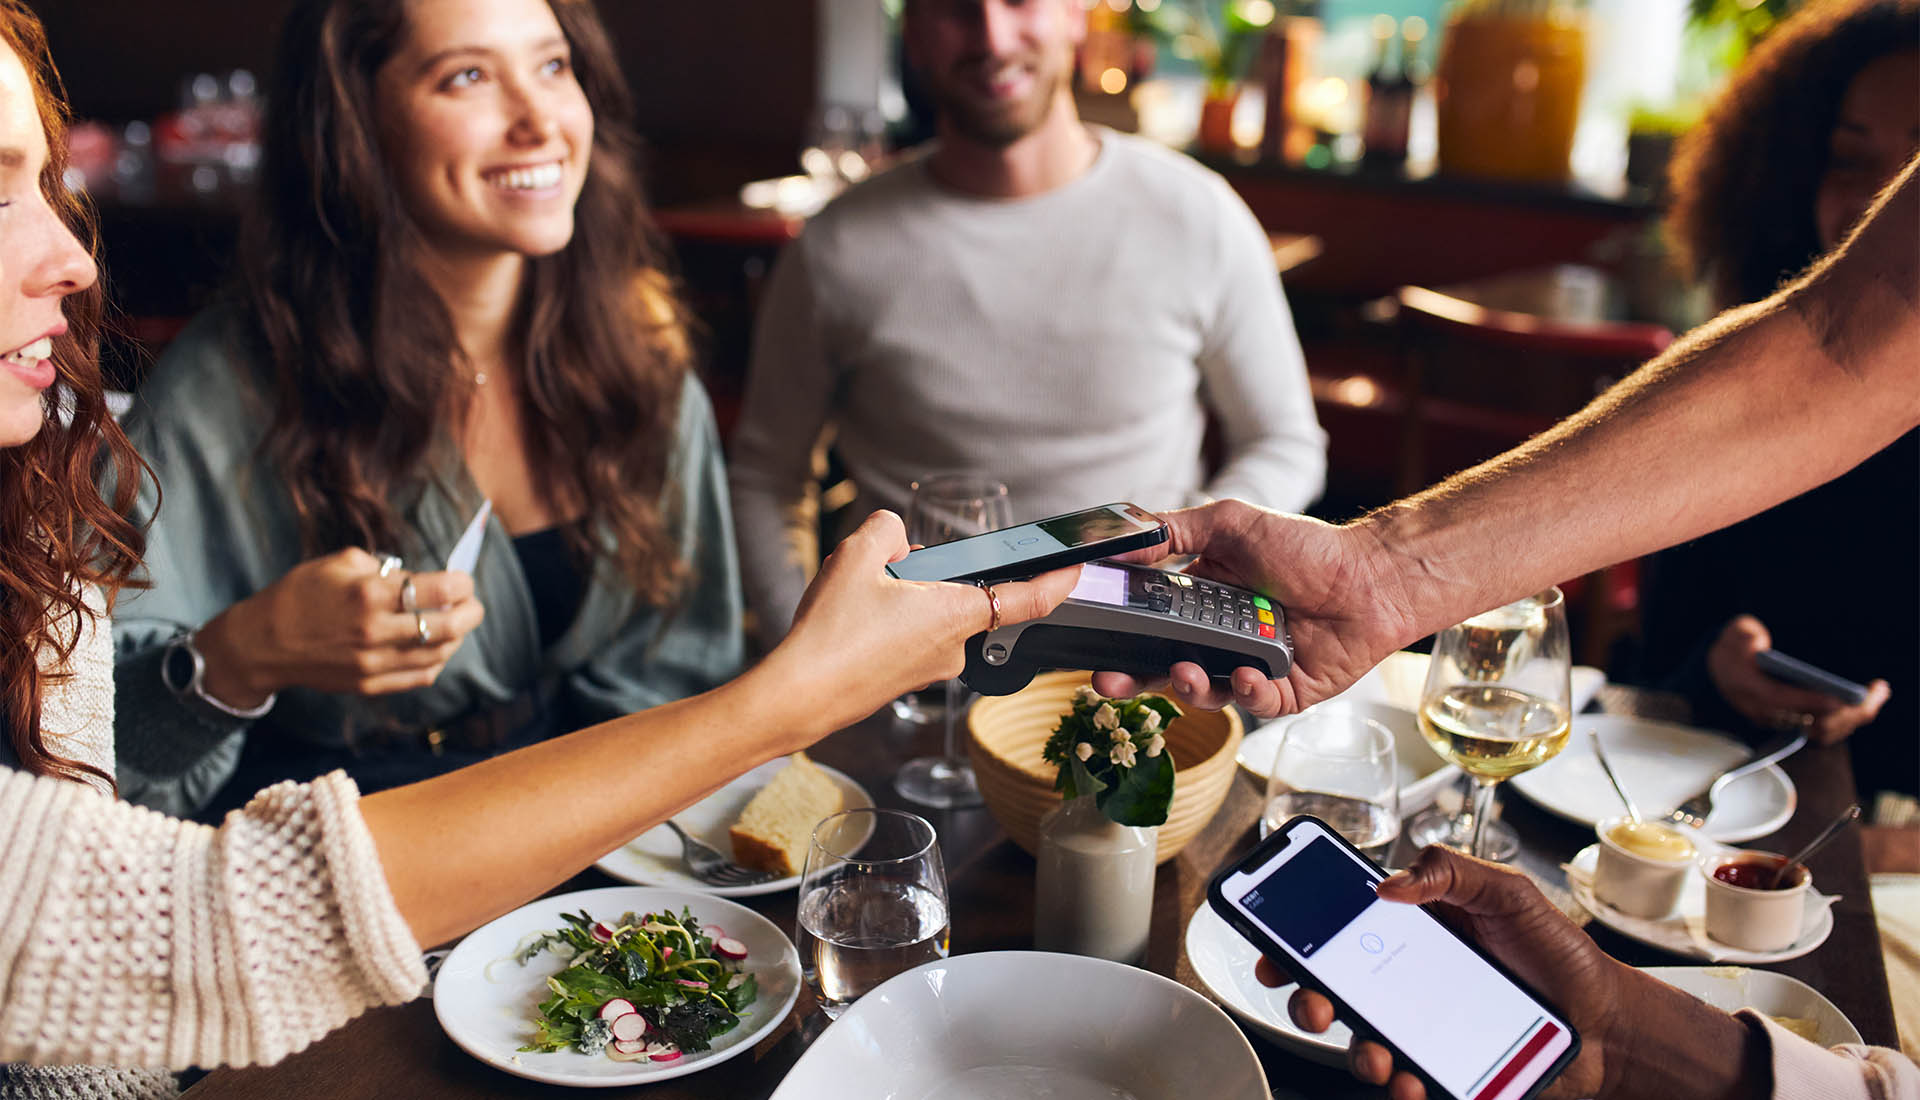 The 4 ways that restaurants are benefiting from payment innovation